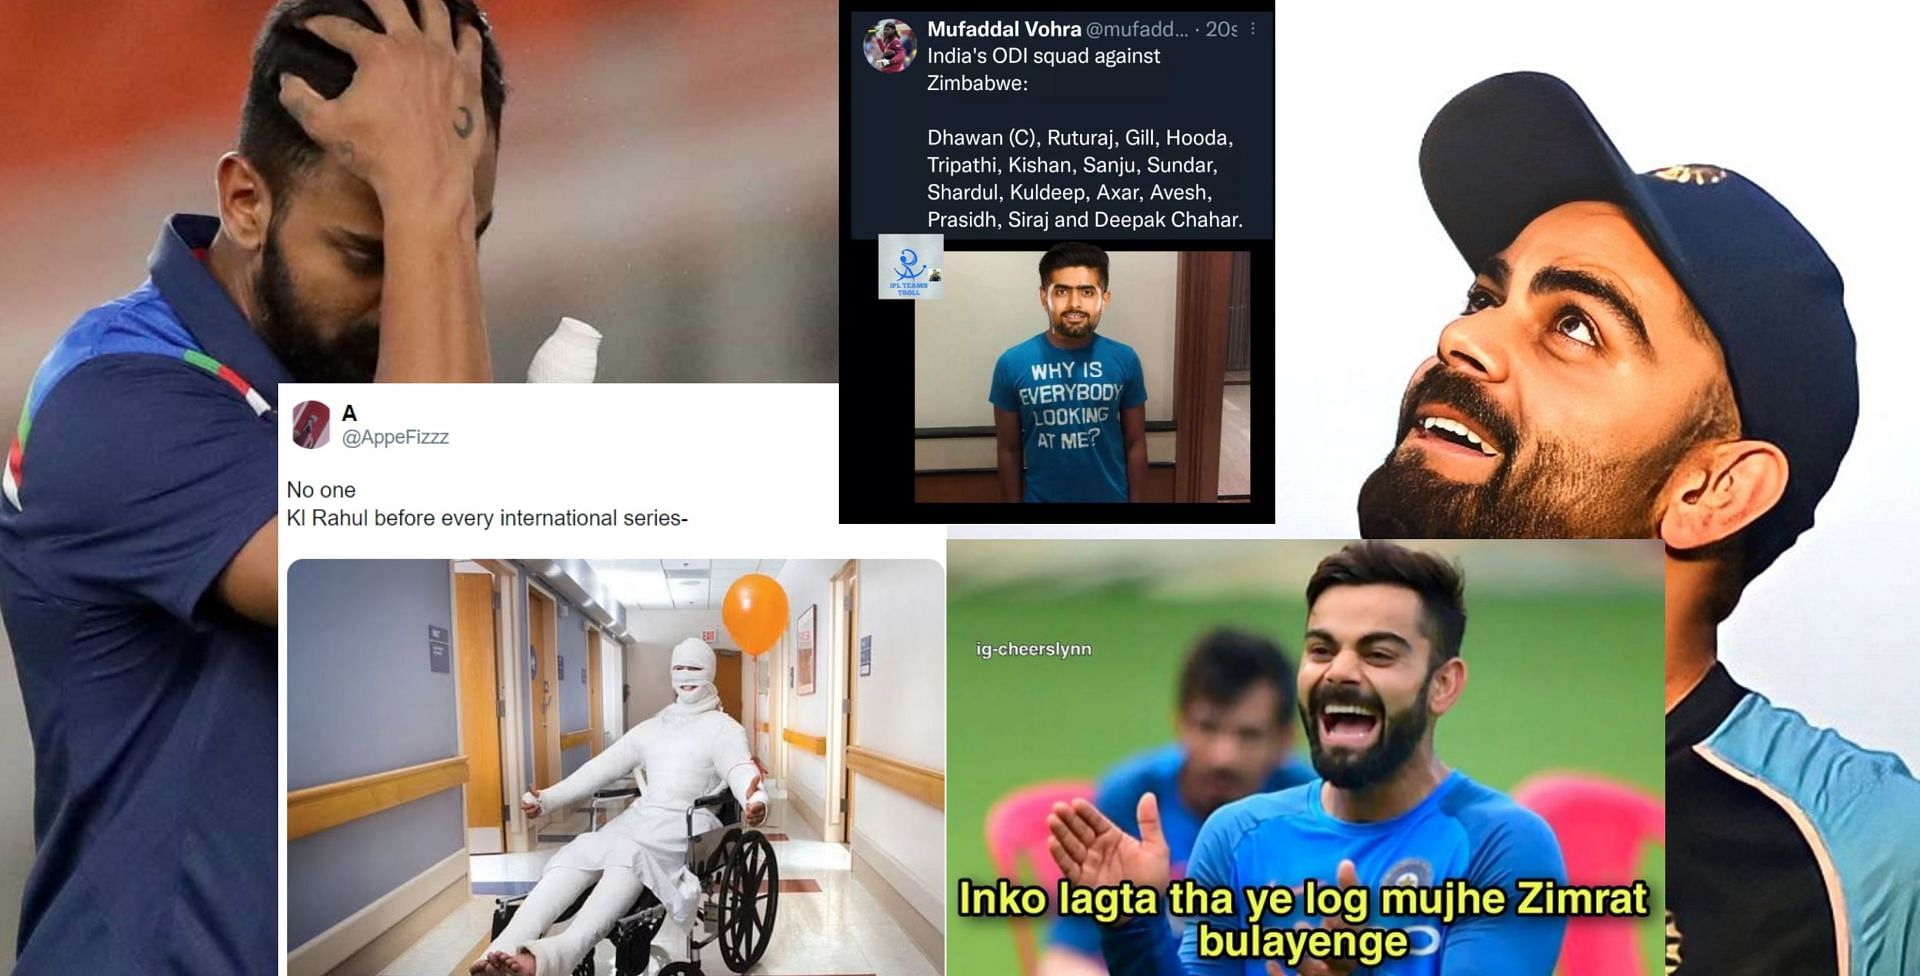 Fans react to the announcement of the Indian squad for the Zimbabwe tour.